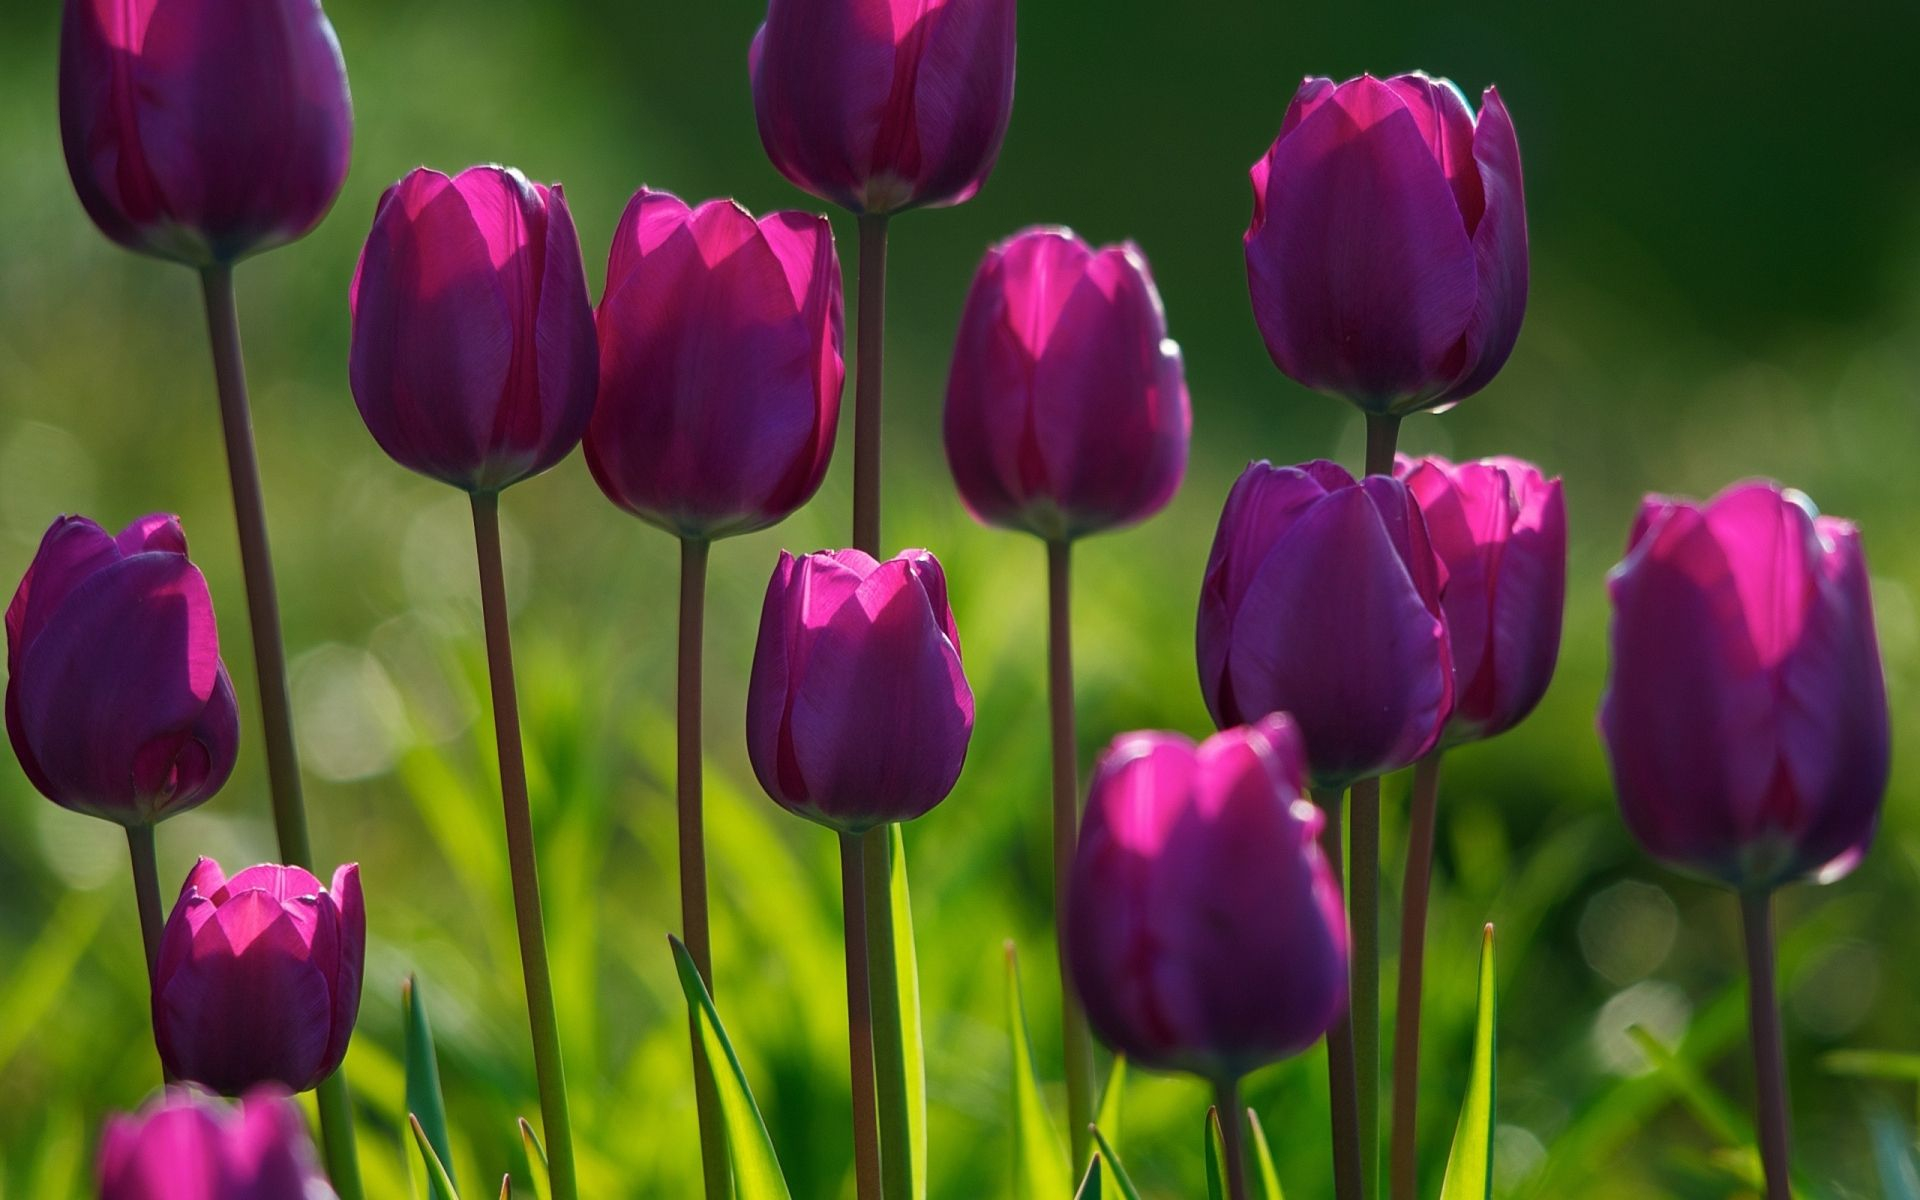 1920x1200 flowers pictures | Spring Purple Tulips Flowers Wallpapers 1384757 | Purple tulips, Spring flowers wallpaper, Tulips flowers